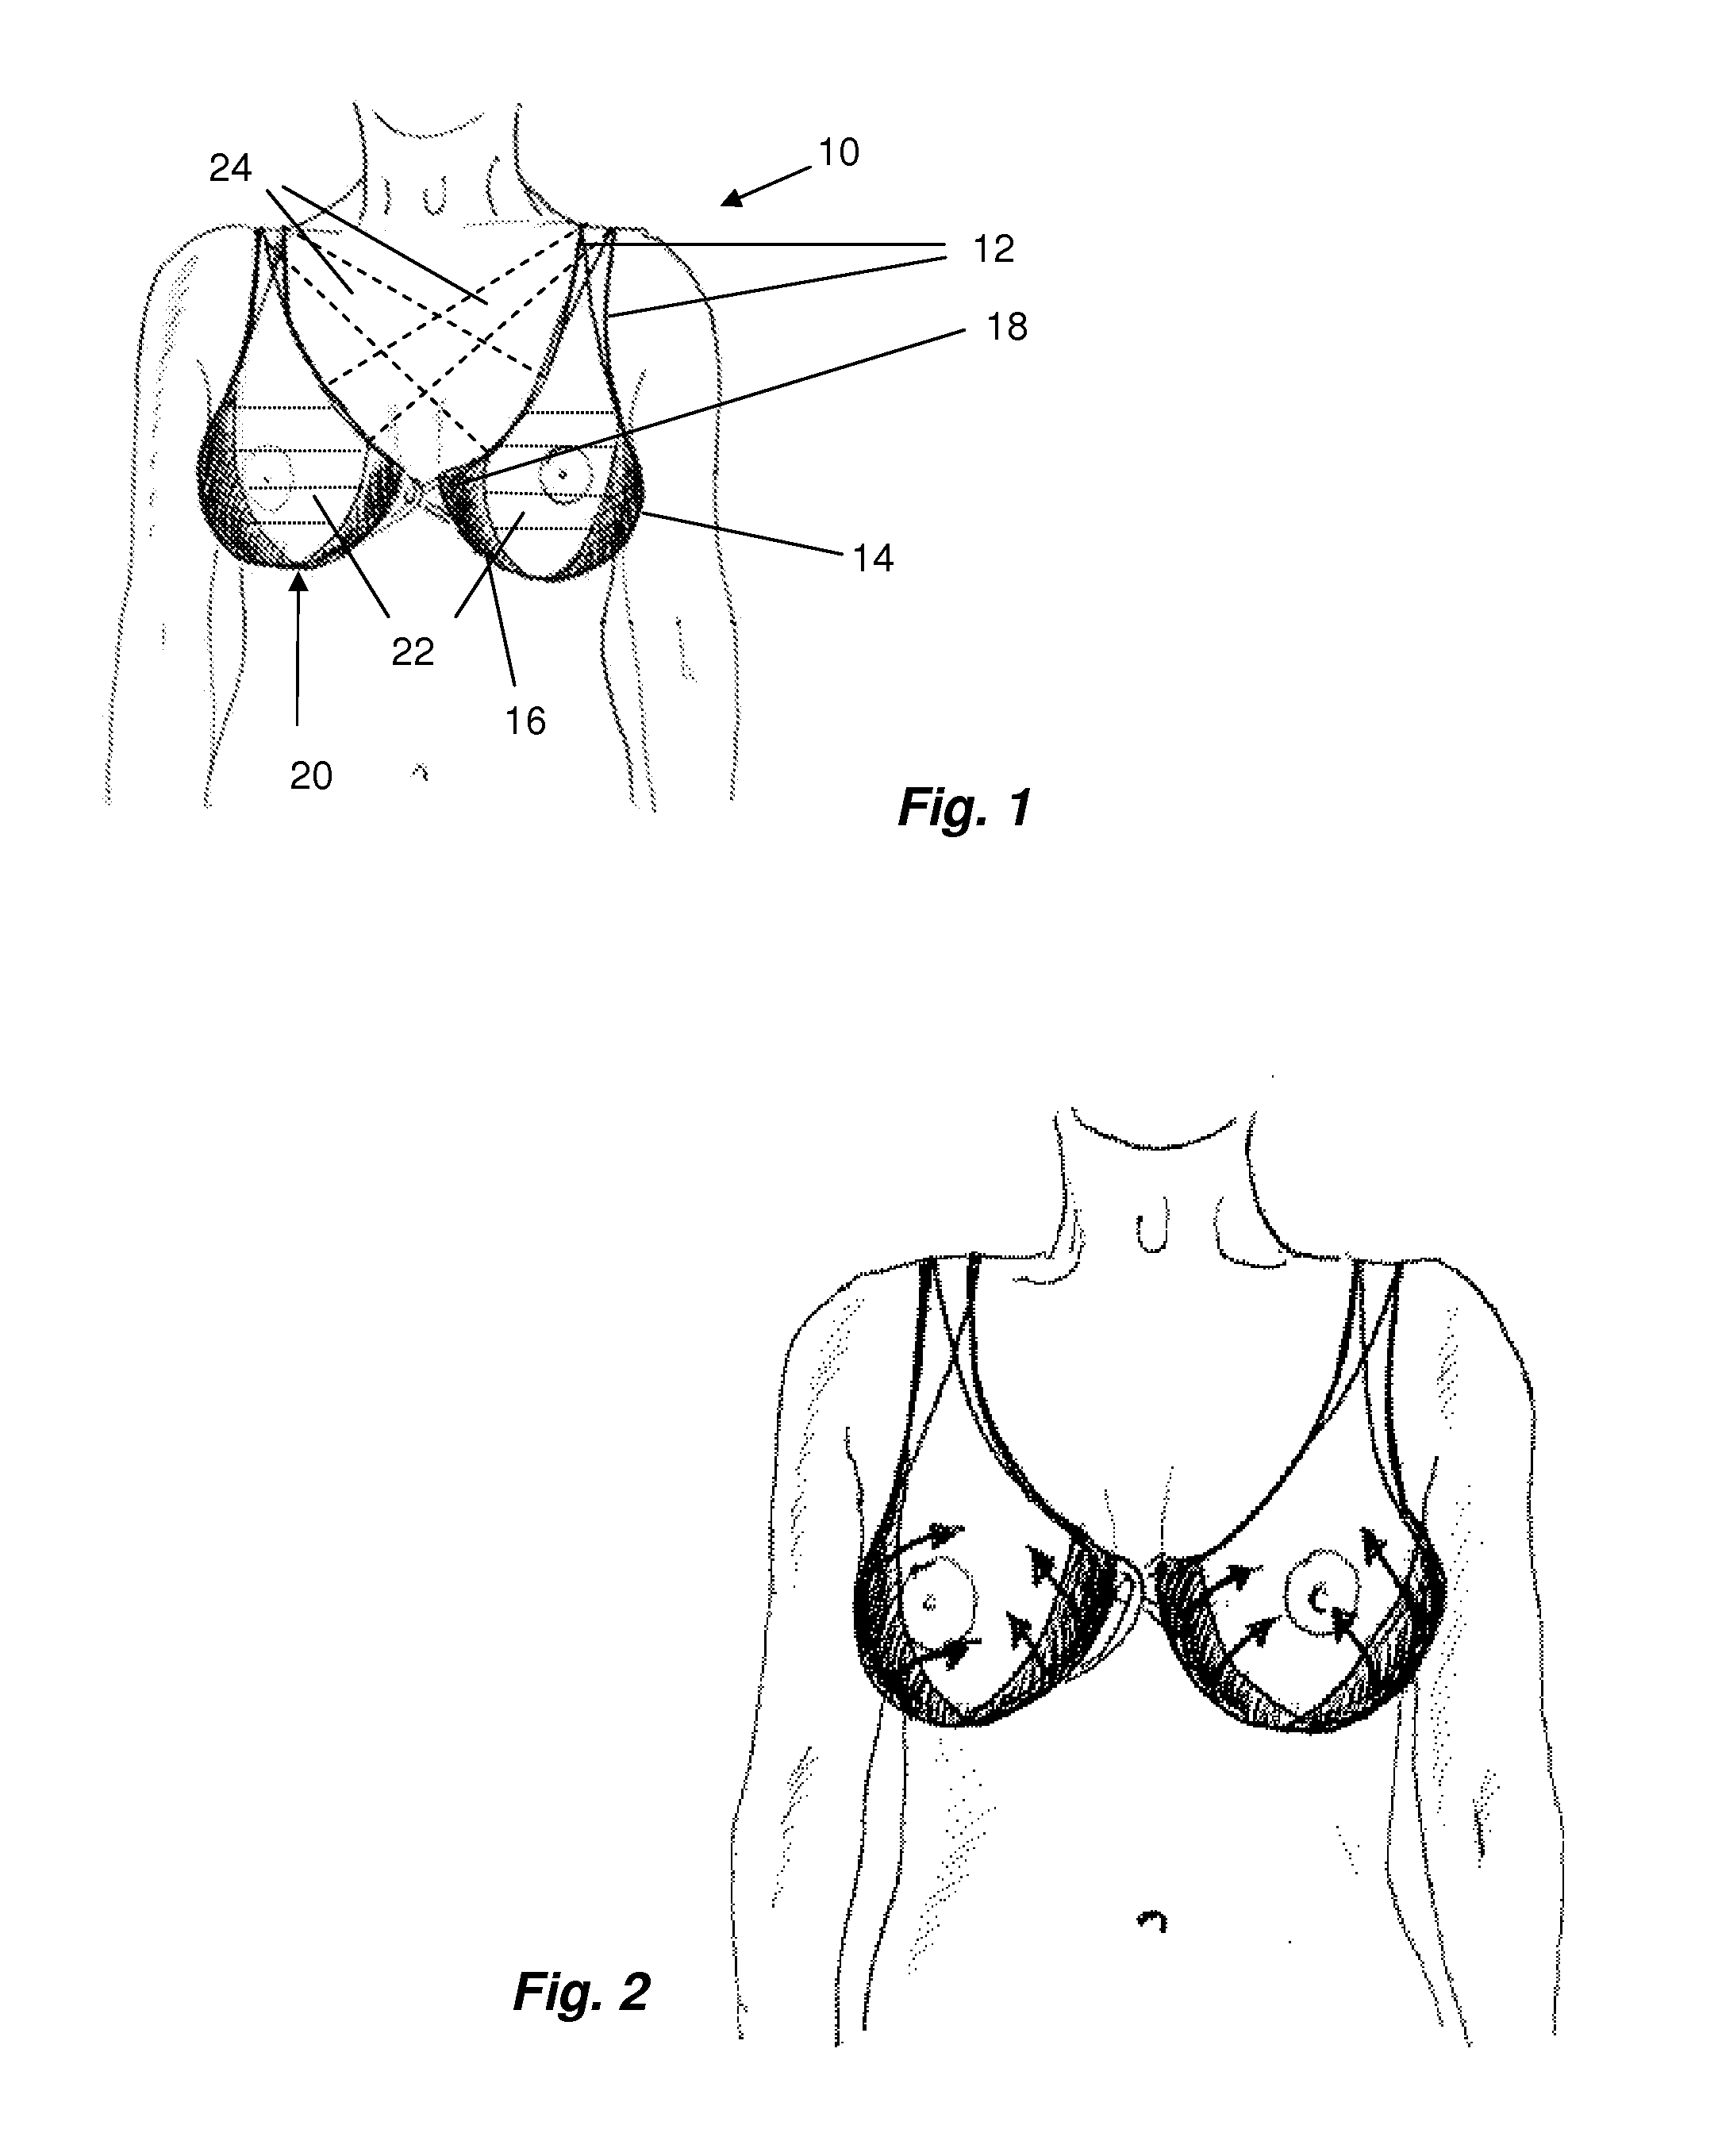 Breast support system for recumbent woman